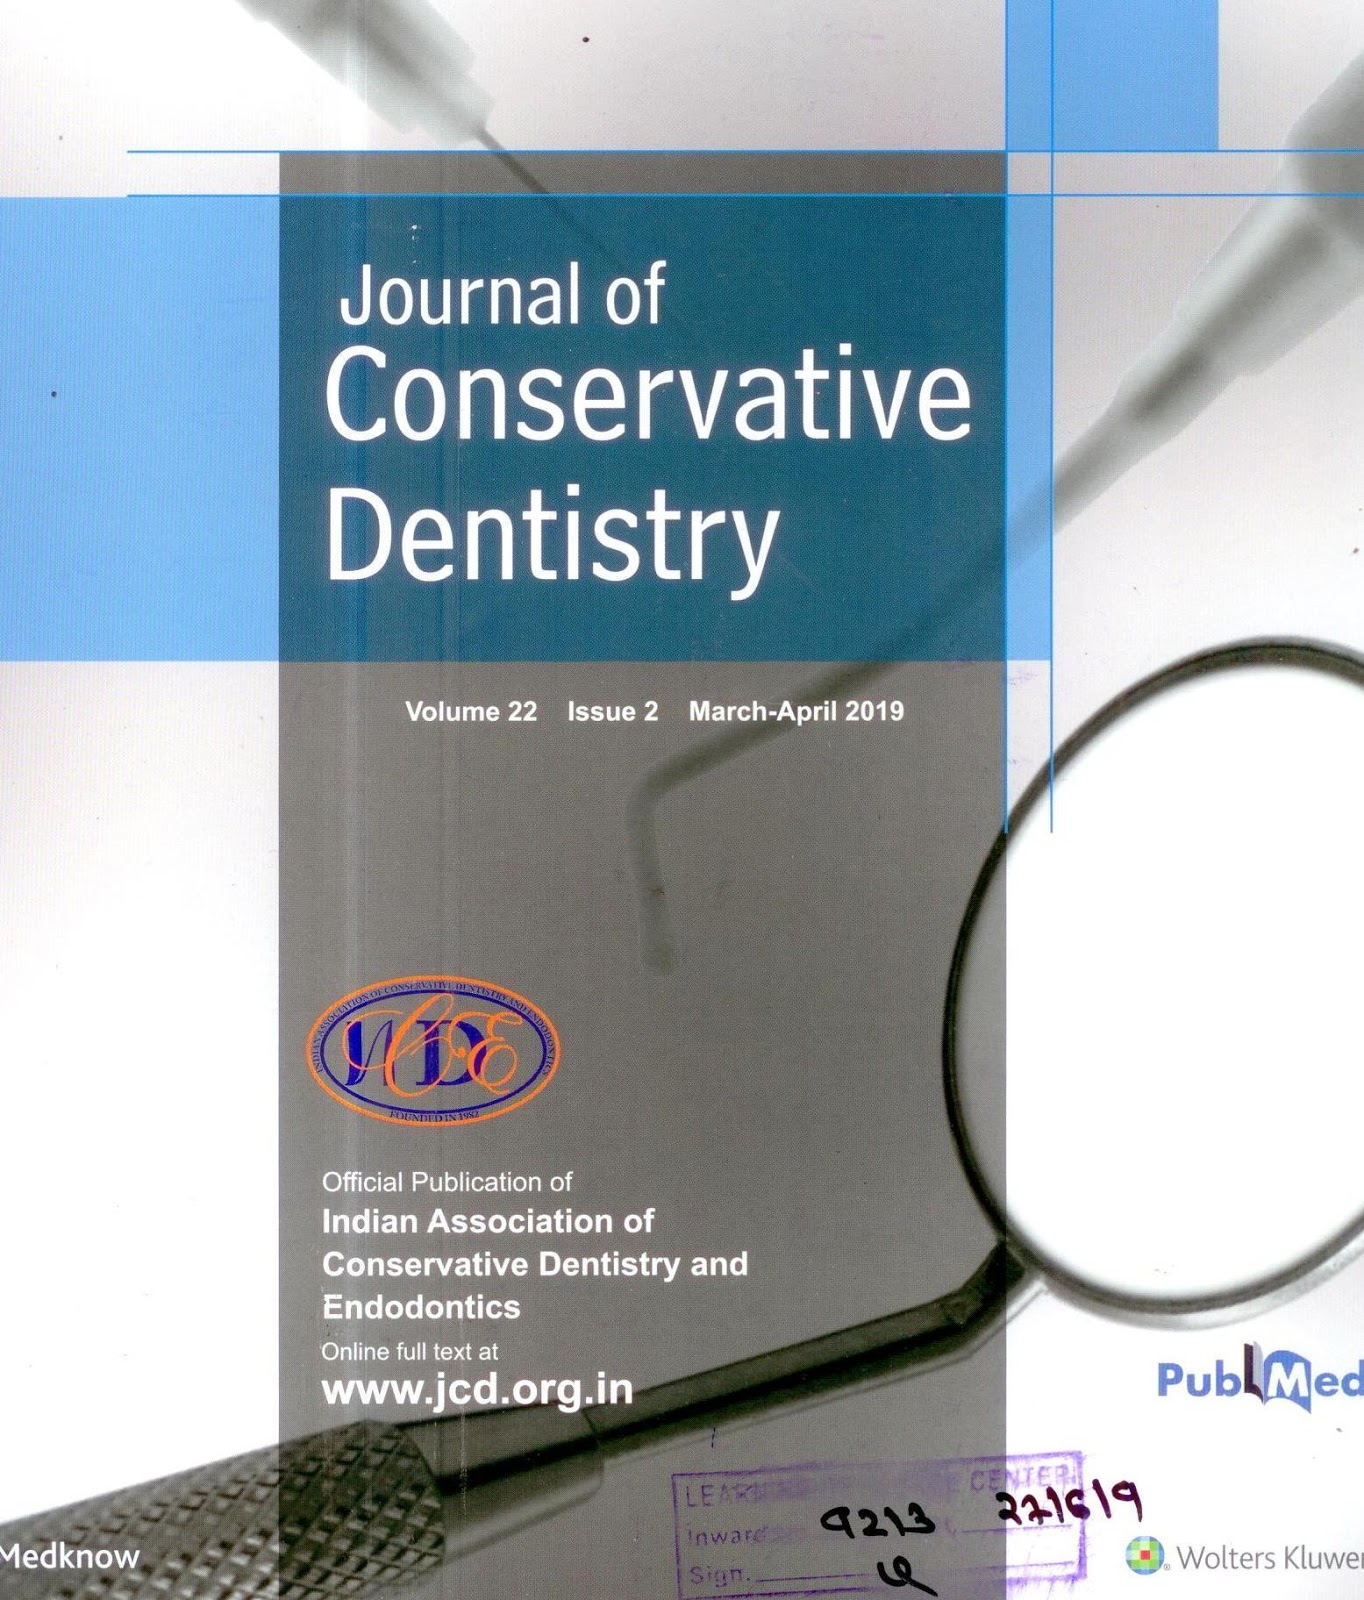 http://www.jcd.org.in/showBackIssue.asp?issn=0972-0707;year=2019;volume=22;issue=2;month=March-April